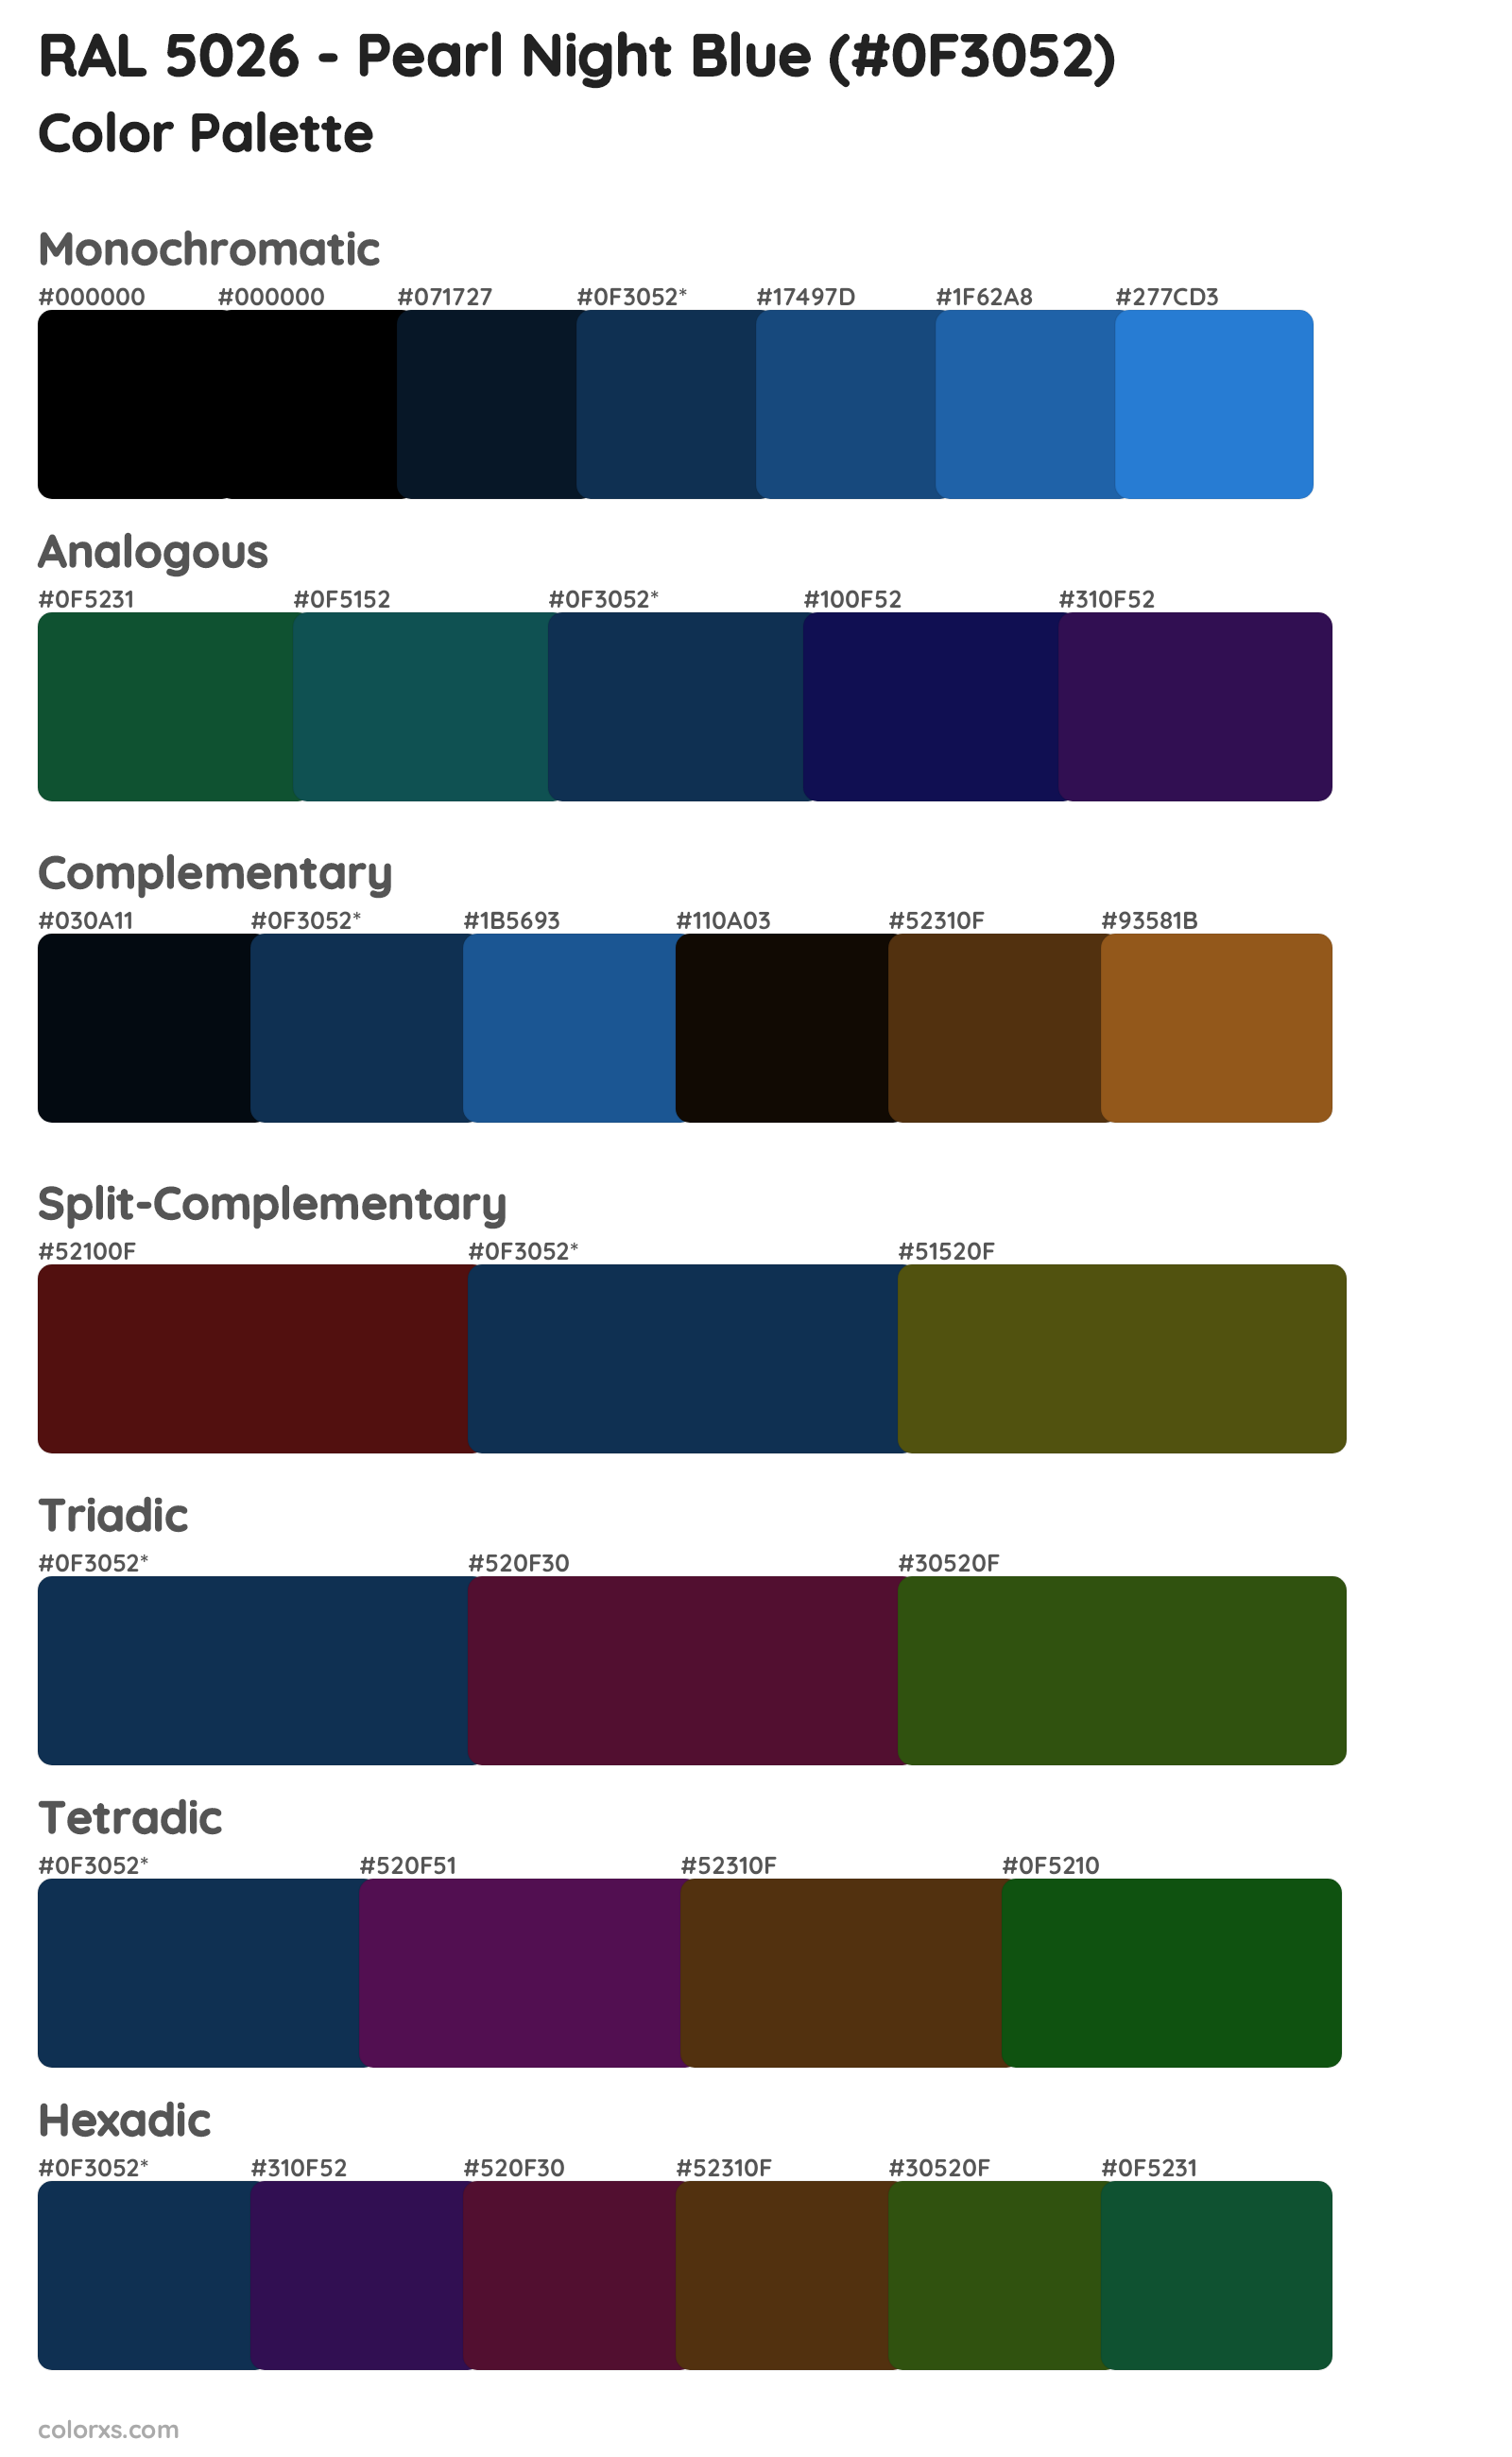 RAL 5026 - Pearl Night Blue Color Scheme Palettes